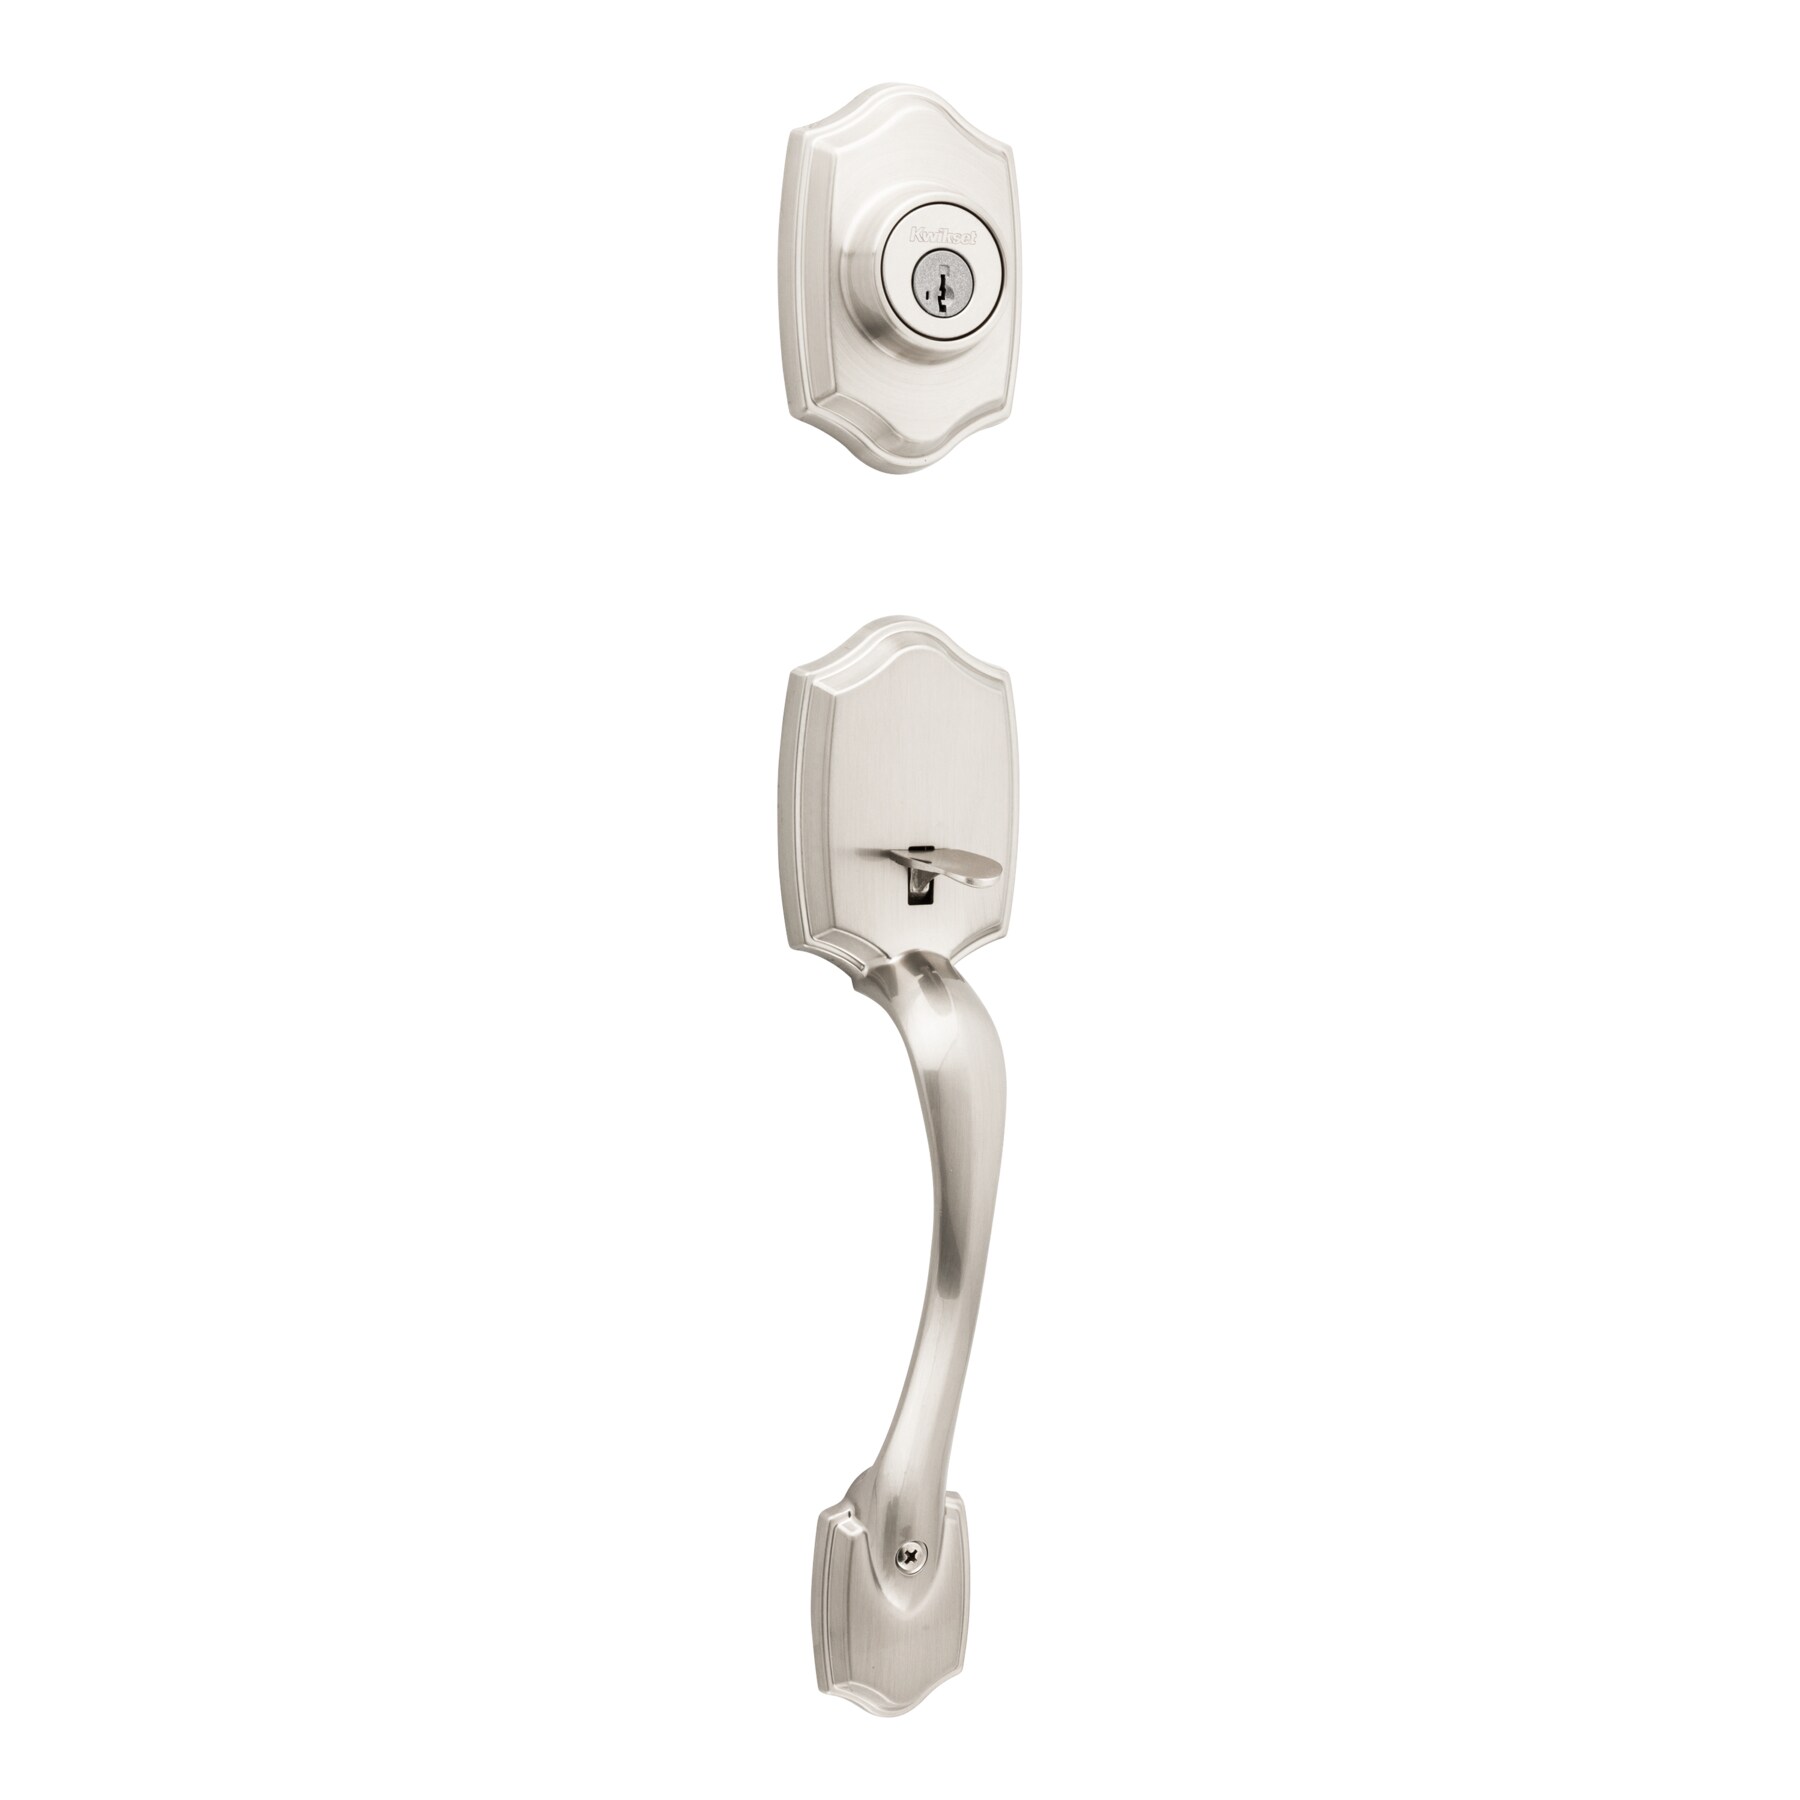 Kwikset 96870-100 Belleview Smartkey Single Cylinder Handleset With Cove  Knob,